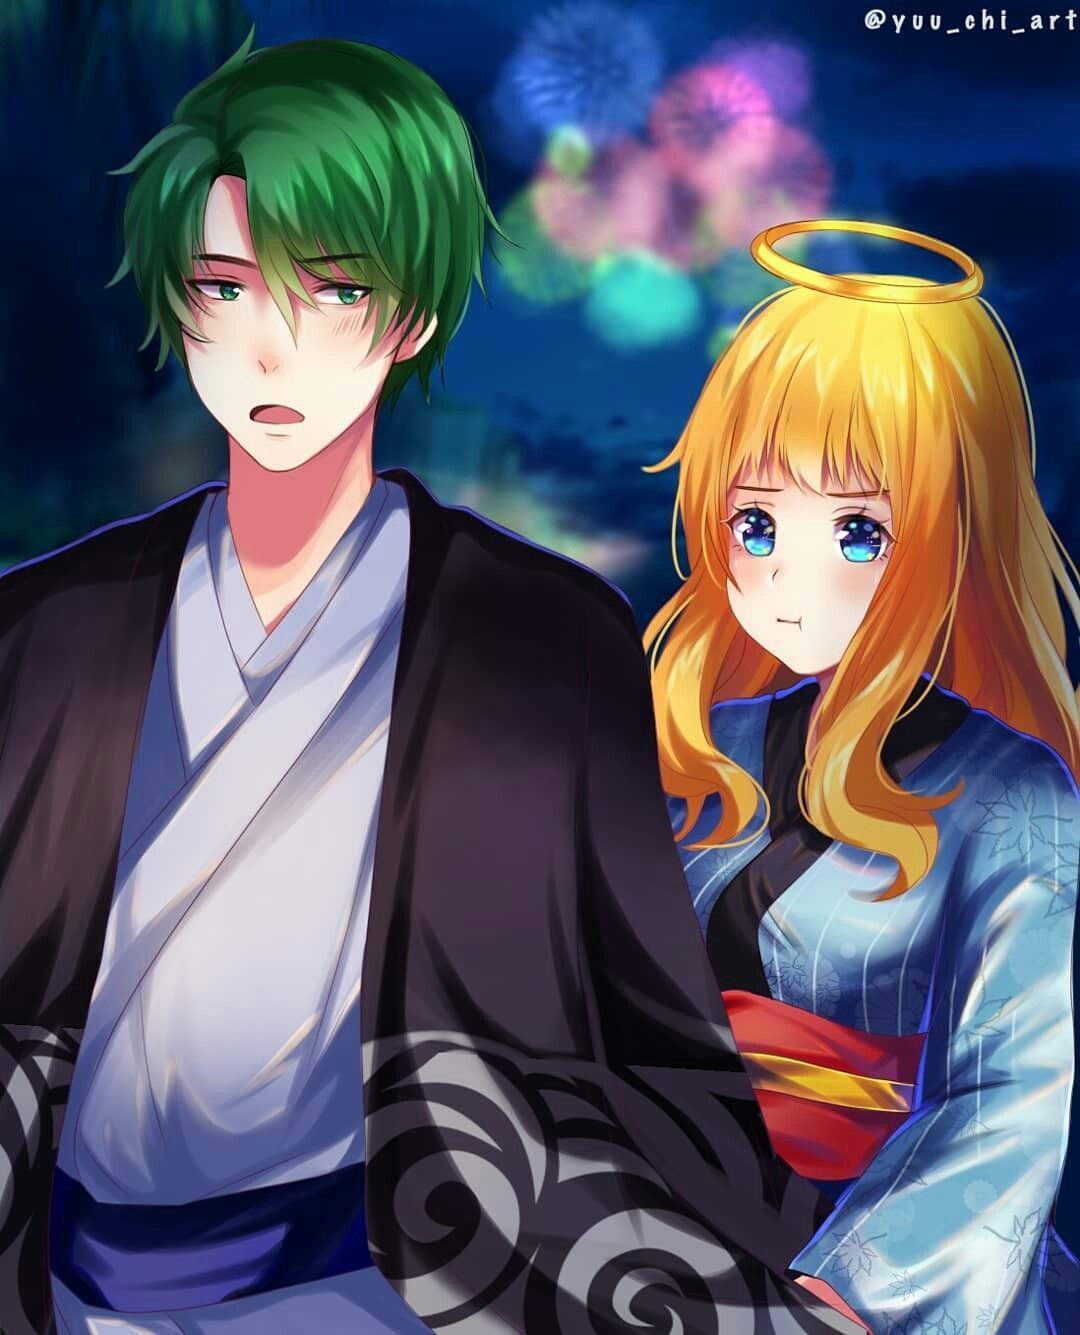 Anime Mobile Legends Couples